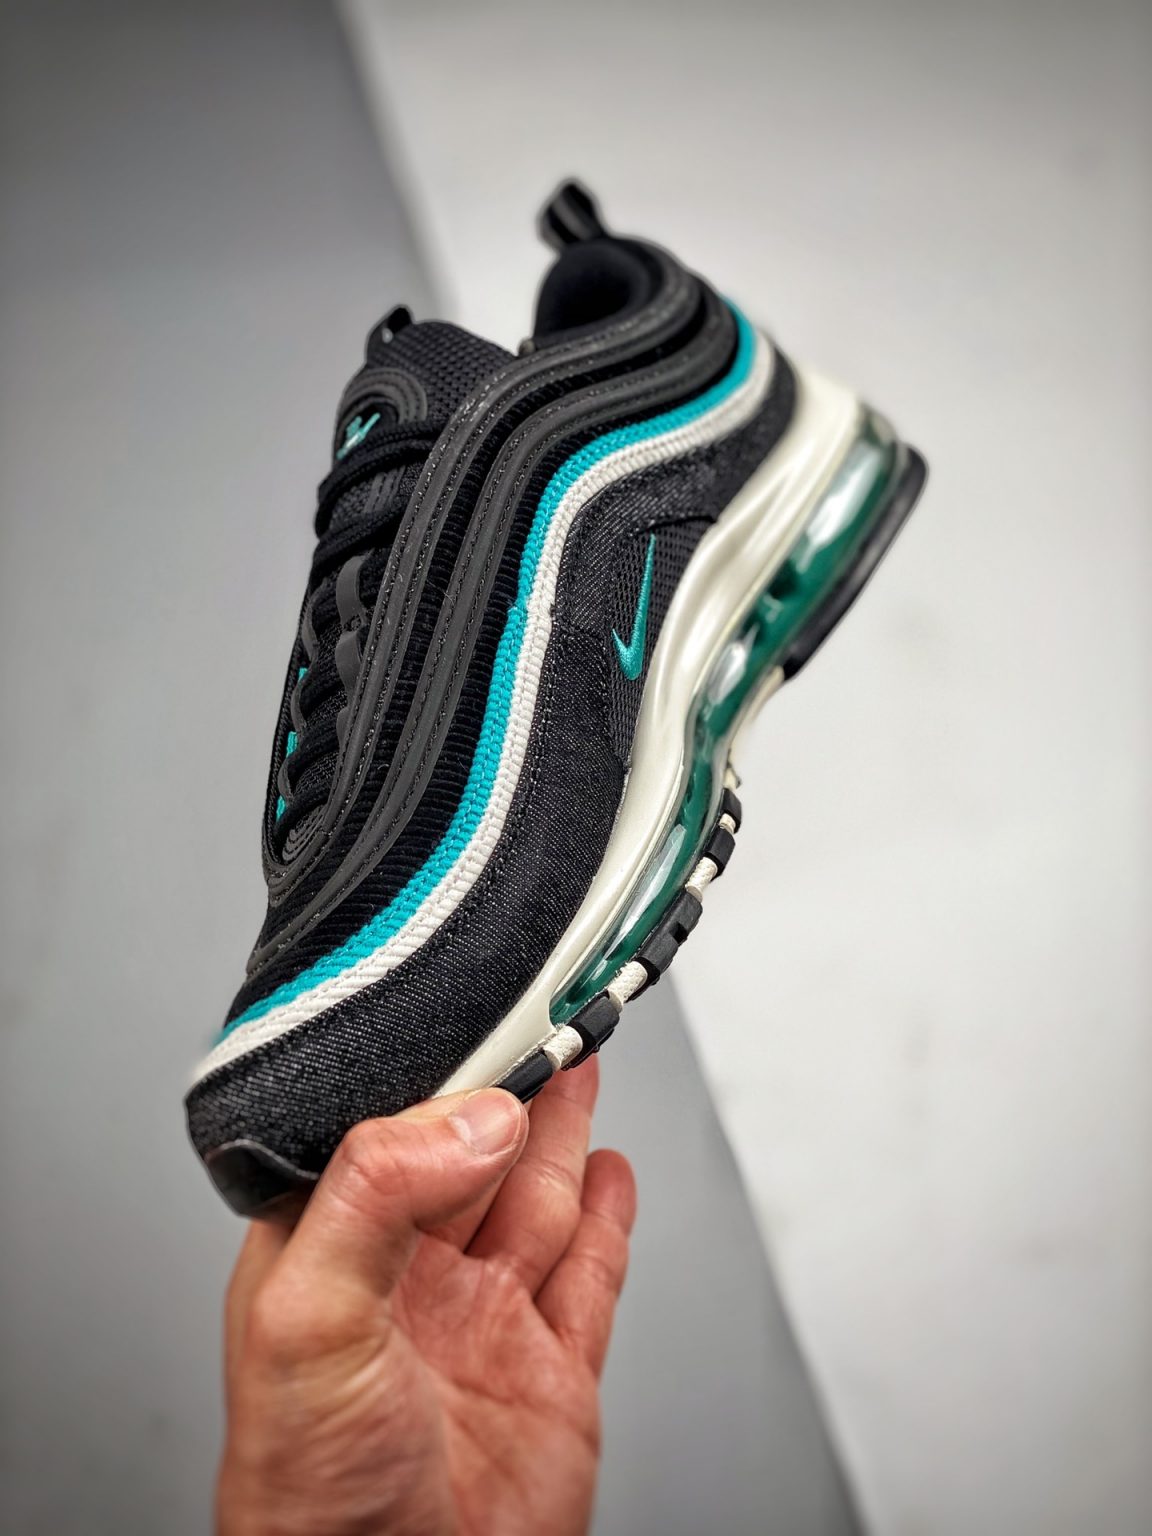 Nike Air Max 97 Black/Sport Turquoise-White DN1893-001 For Sale ...